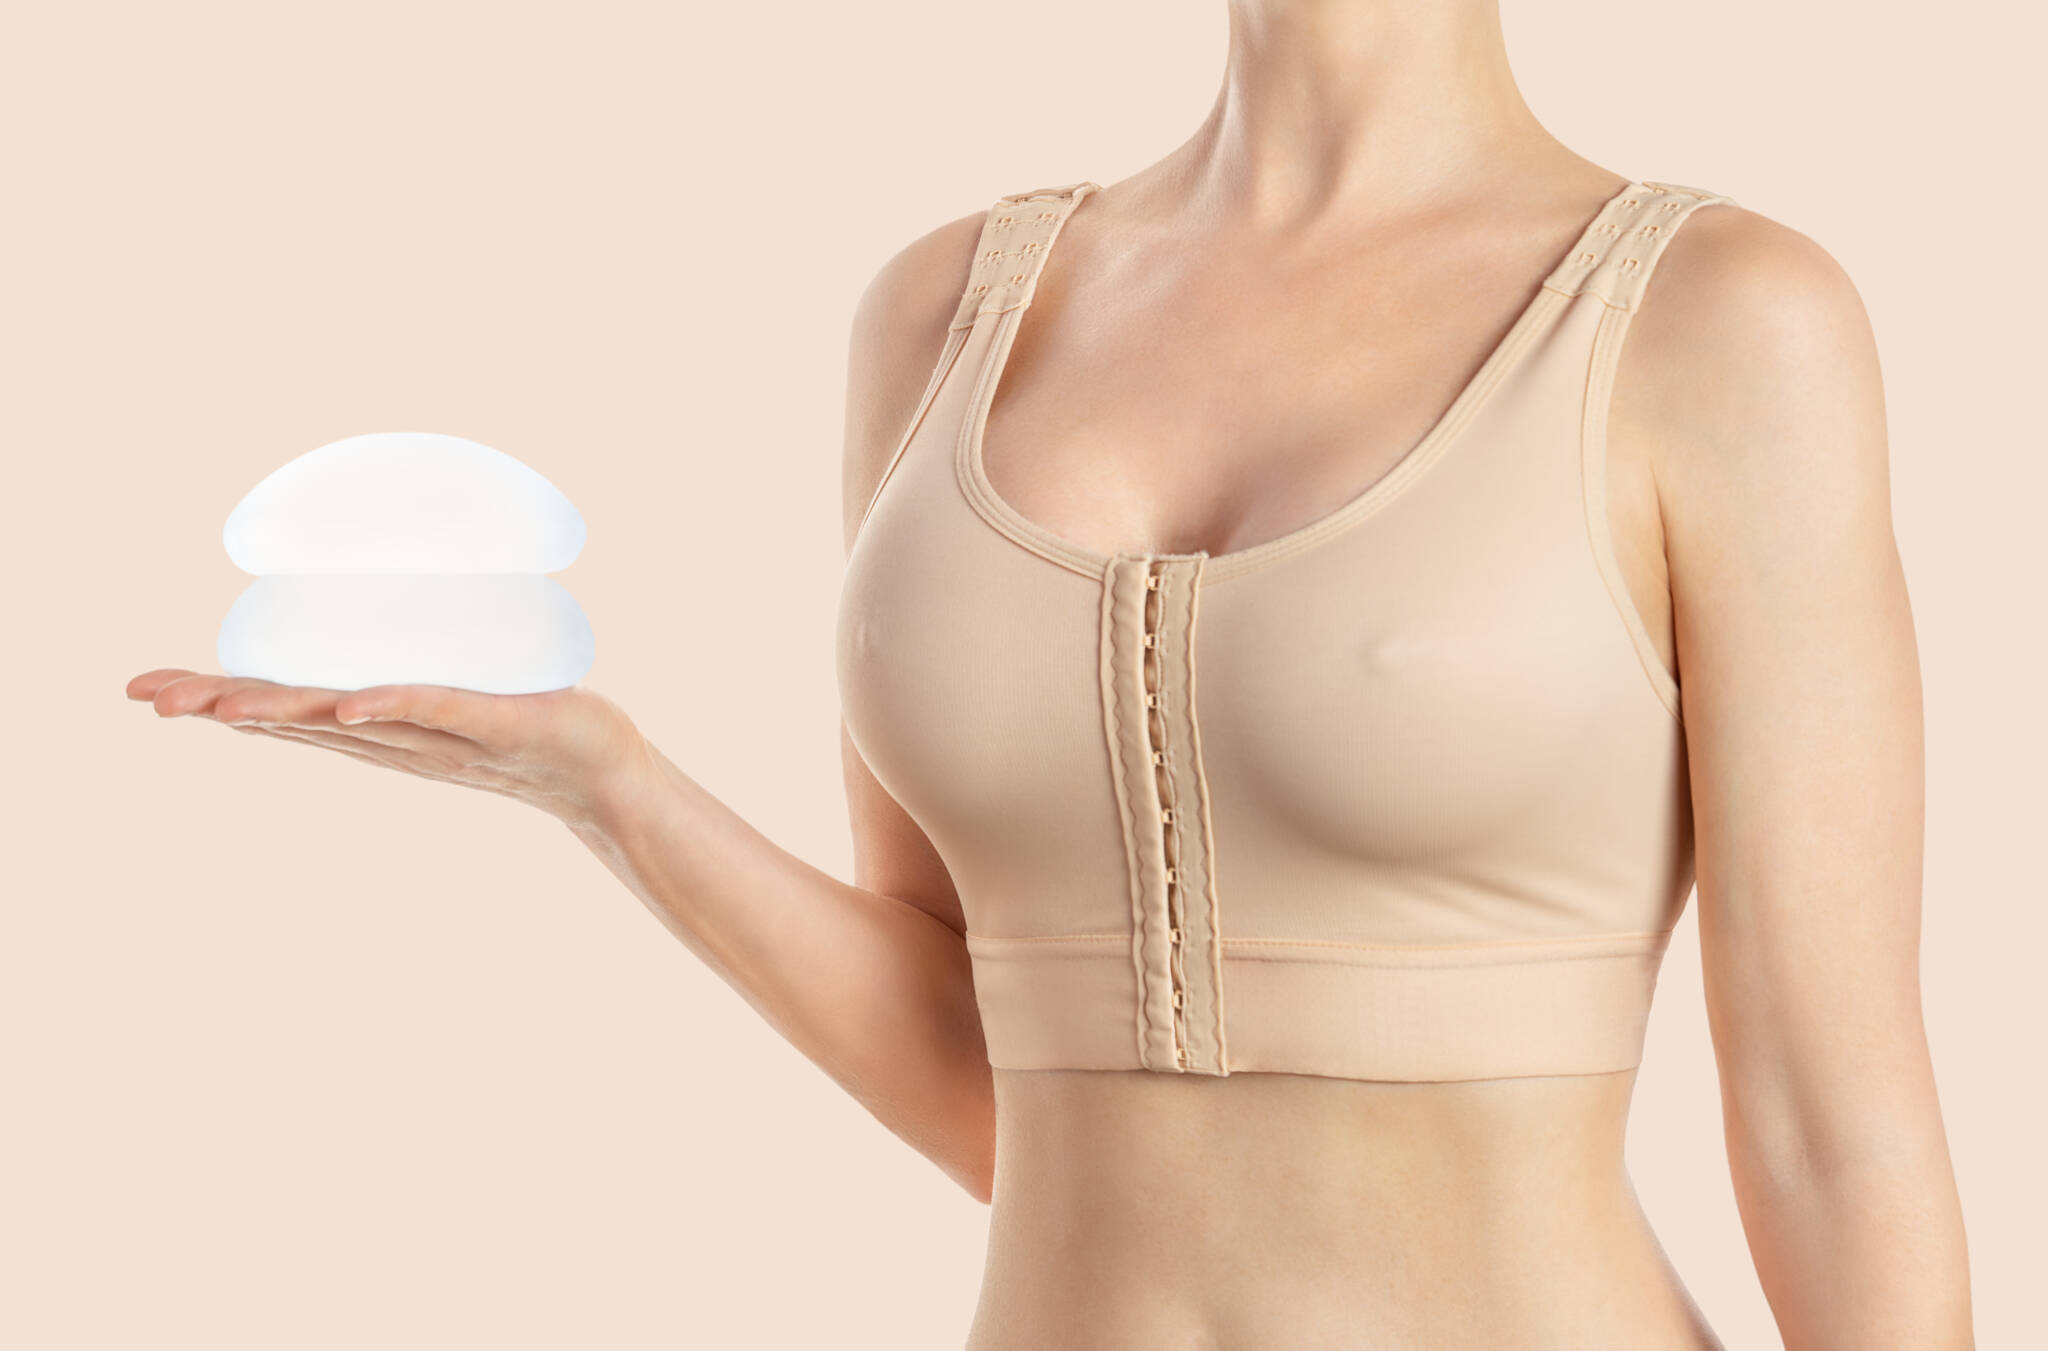 10 Breast Augmentation Myths and Facts People Still Believe